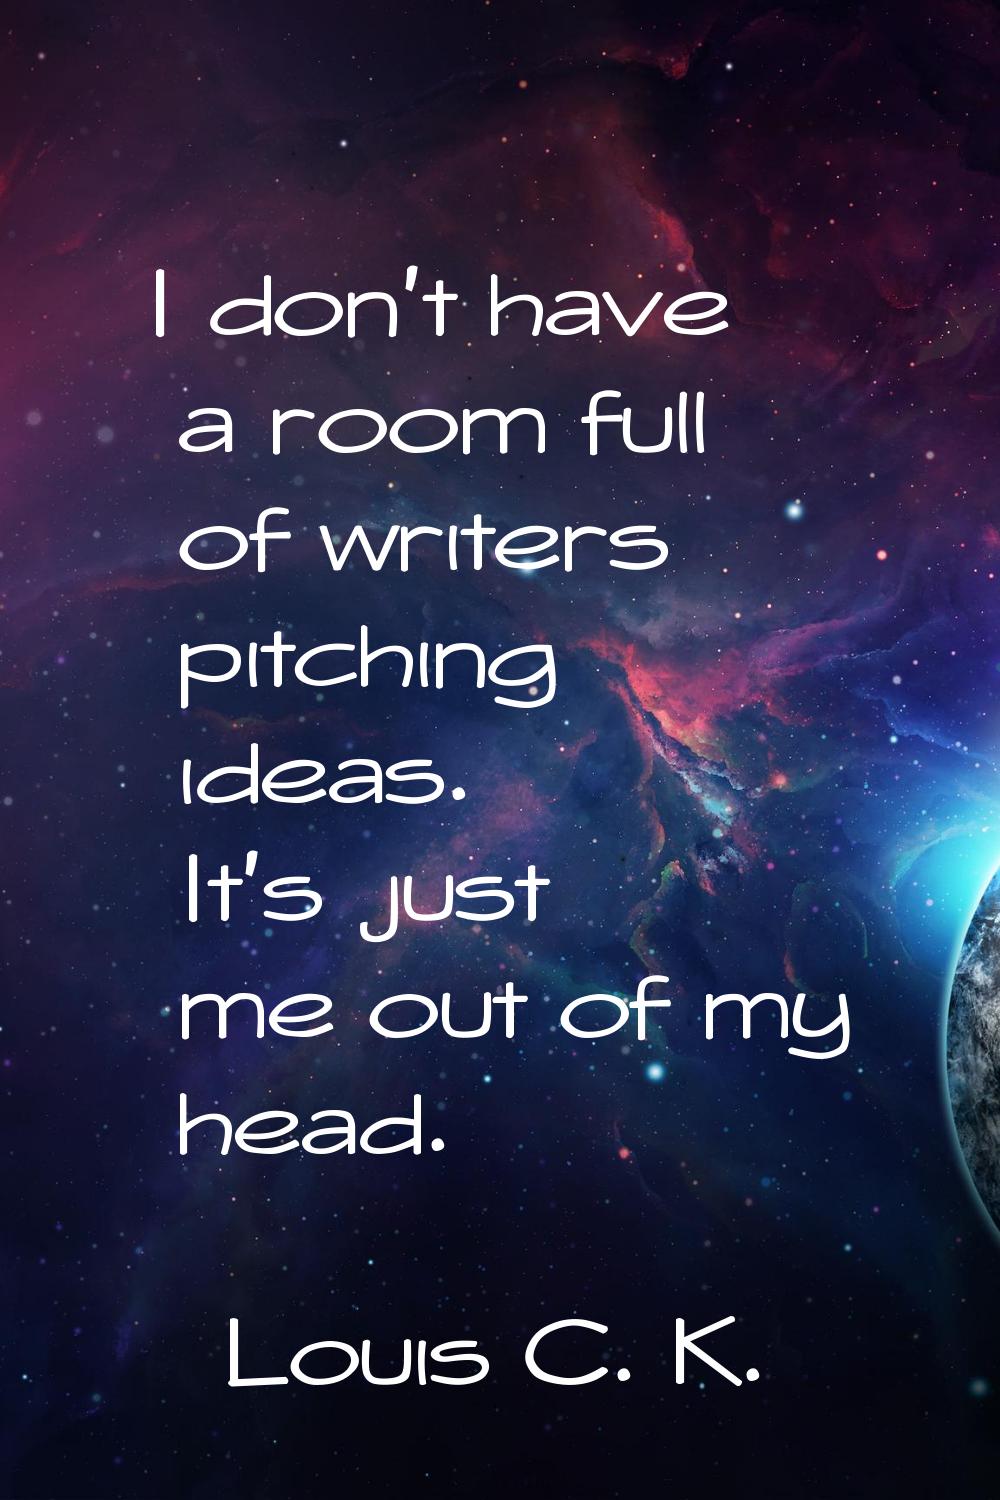 I don't have a room full of writers pitching ideas. It's just me out of my head.